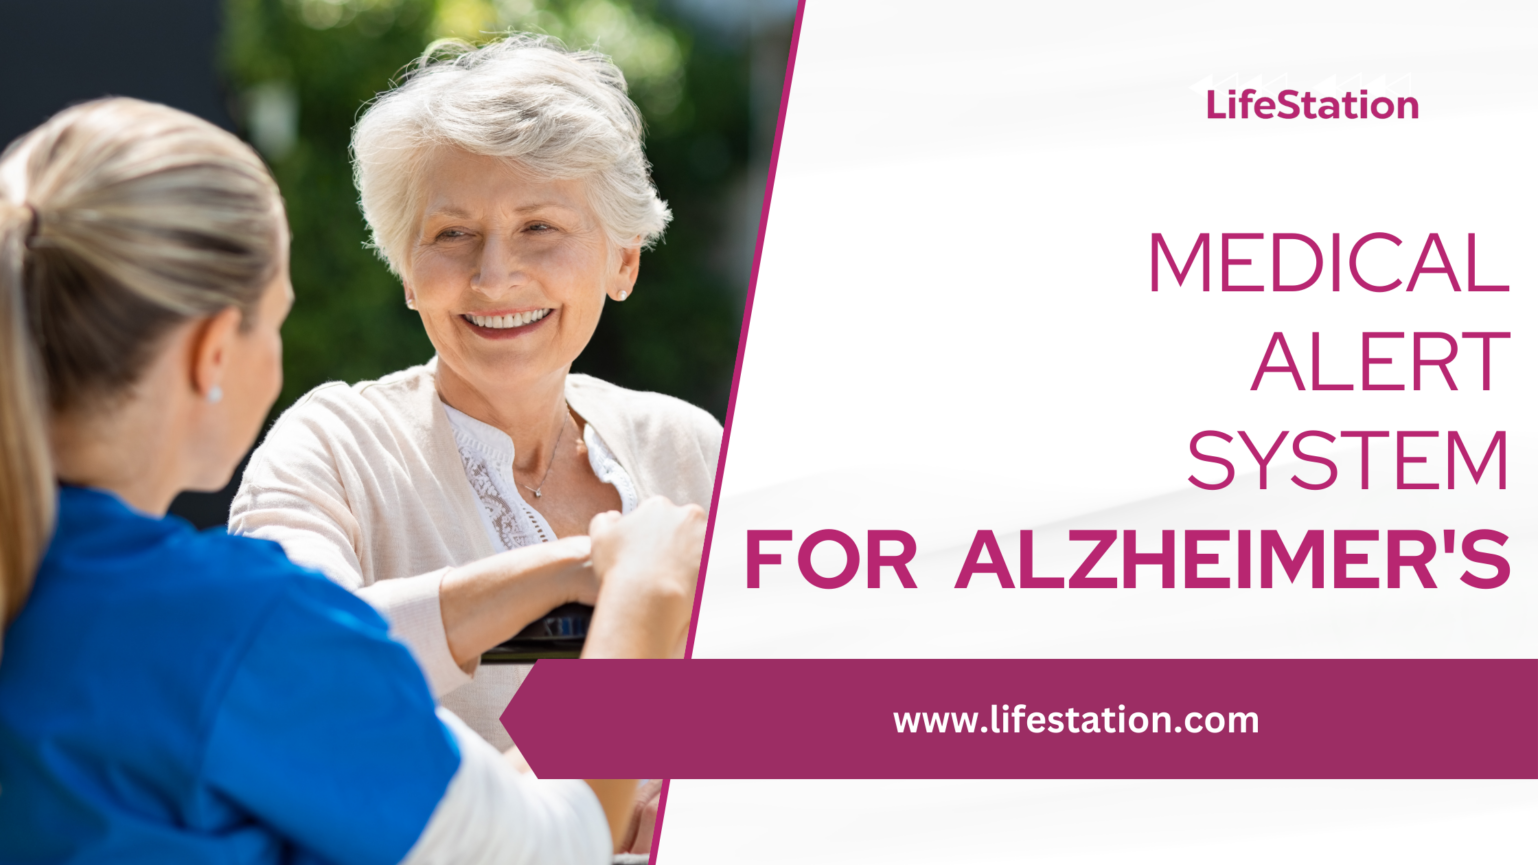 An elderly woman with a bright smile is being assisted by a caregiver outdoors, symbolizing comfort and support, while the image advertises LifeStation's medical alert system specifically designed for individuals with Alzheimer's